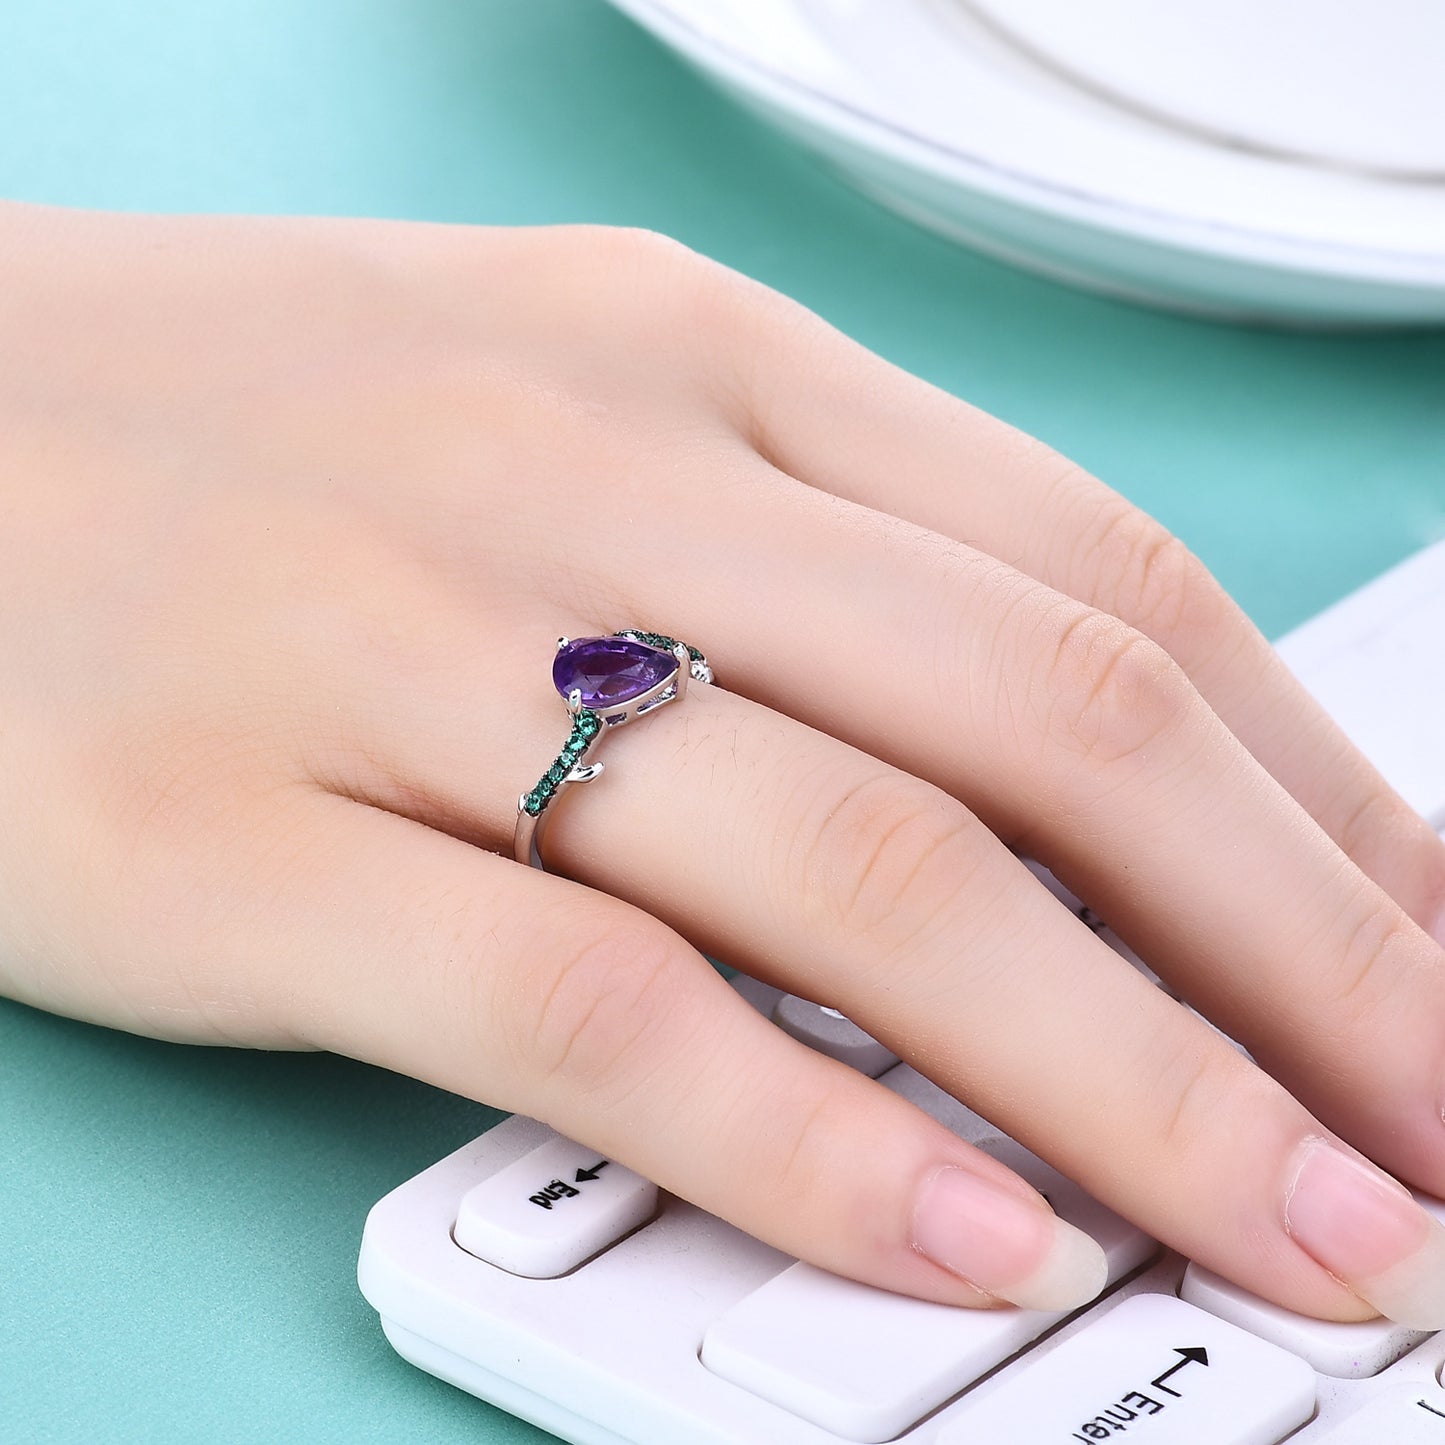 Adjustable s925 Sterling Silver Inlaid with Natural Colorful Amethyst Ring for Women